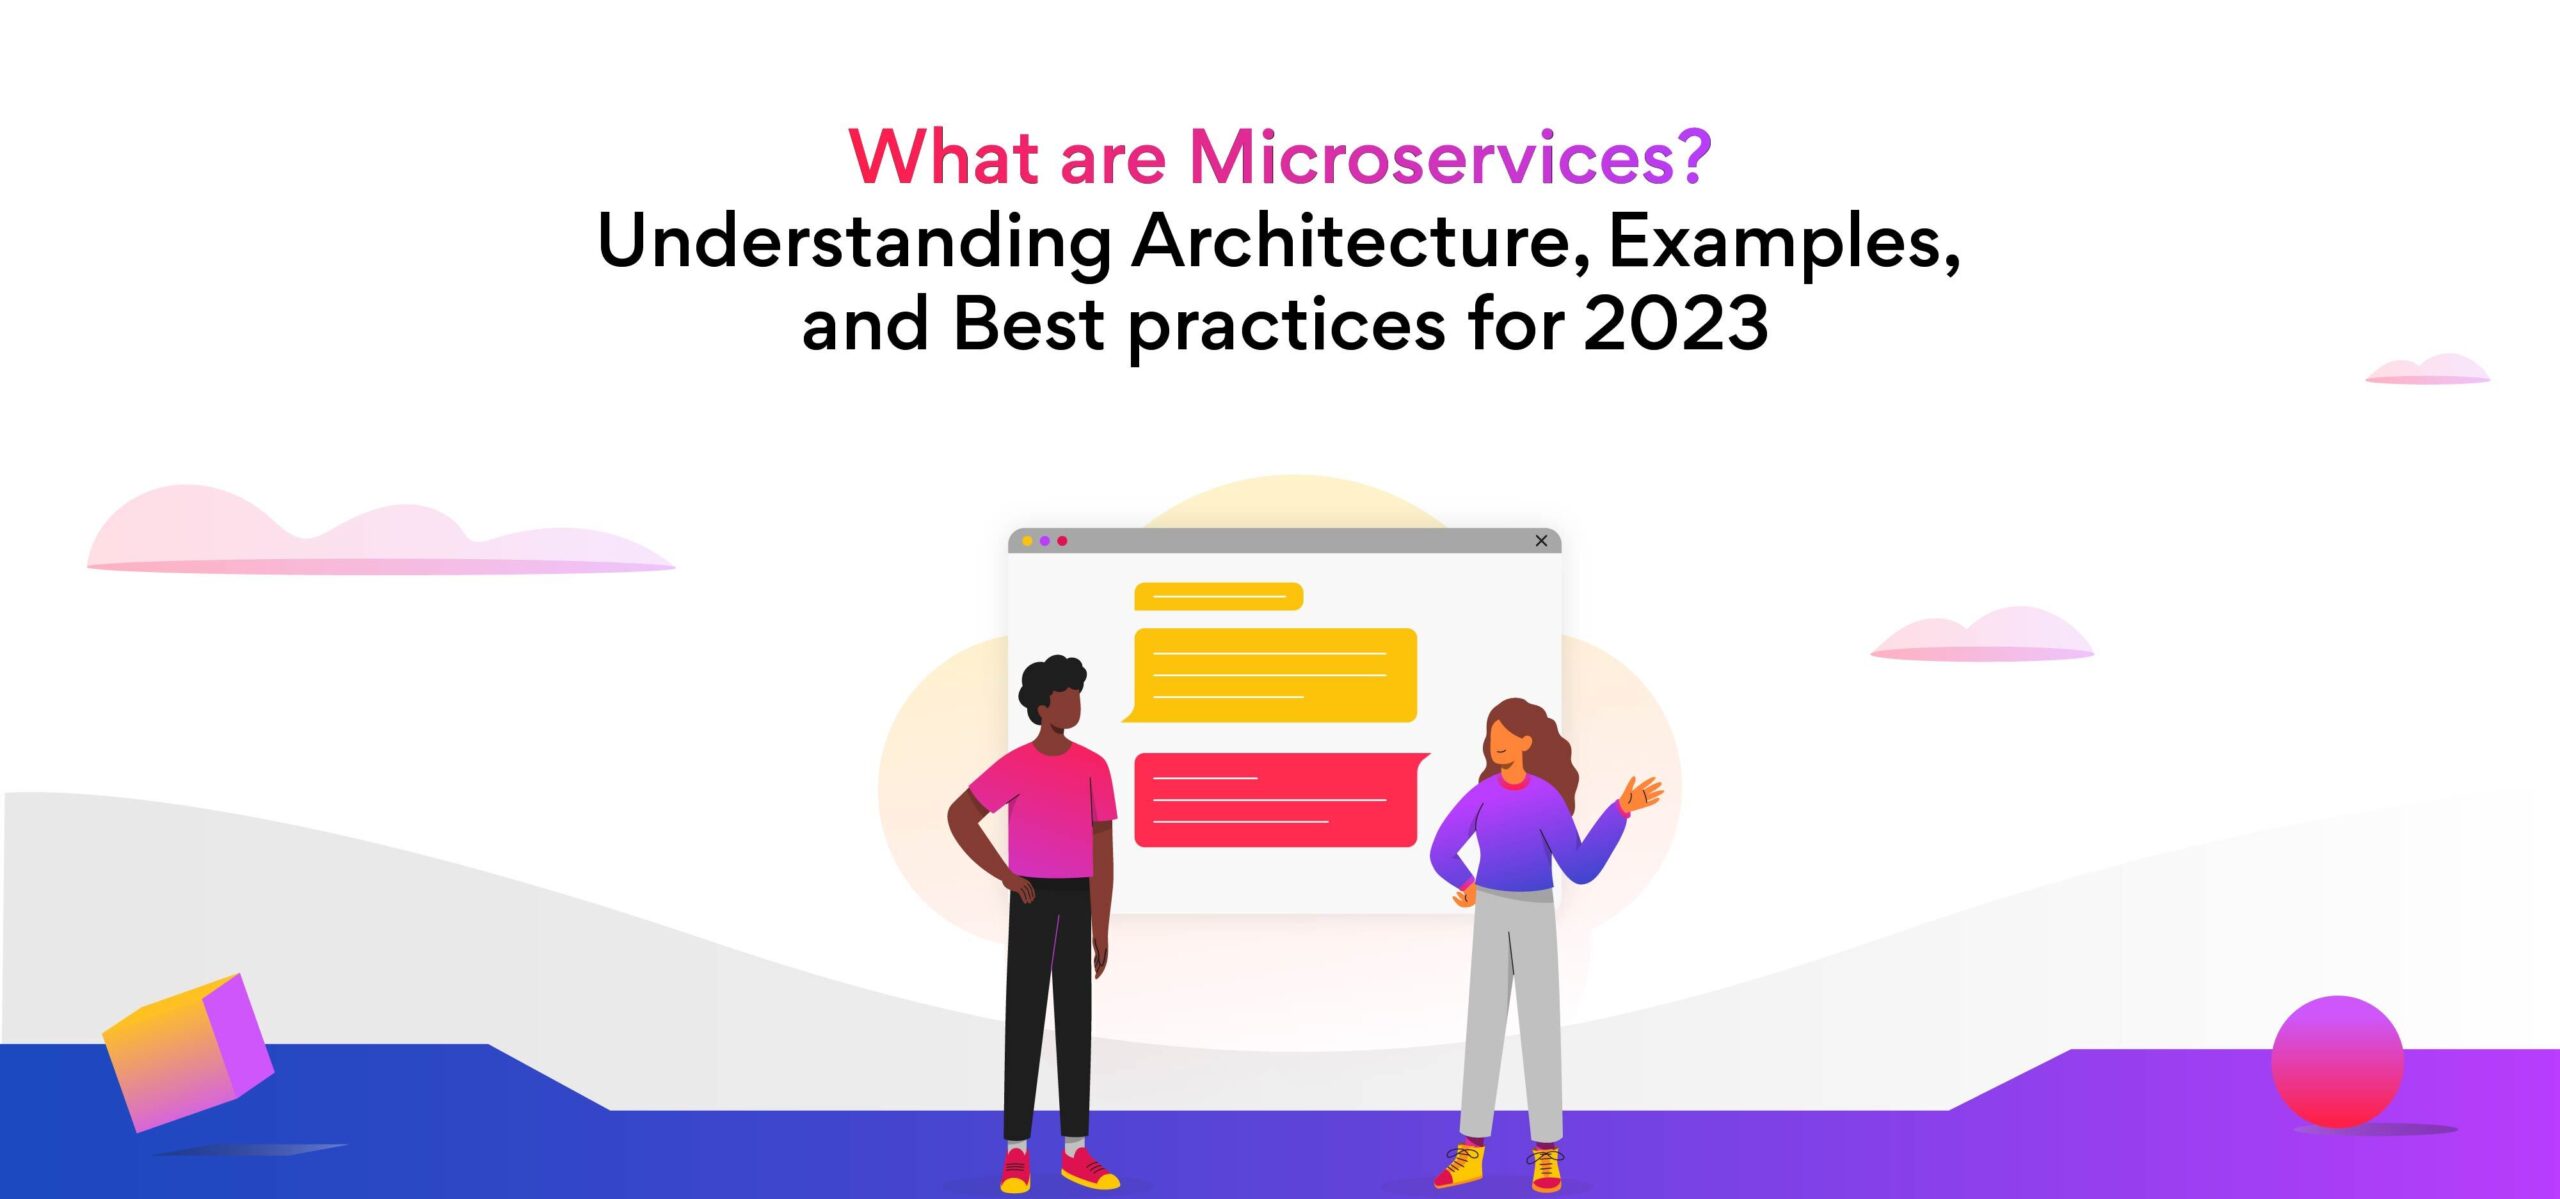 Microservices: Examples and Best Practices for 2023